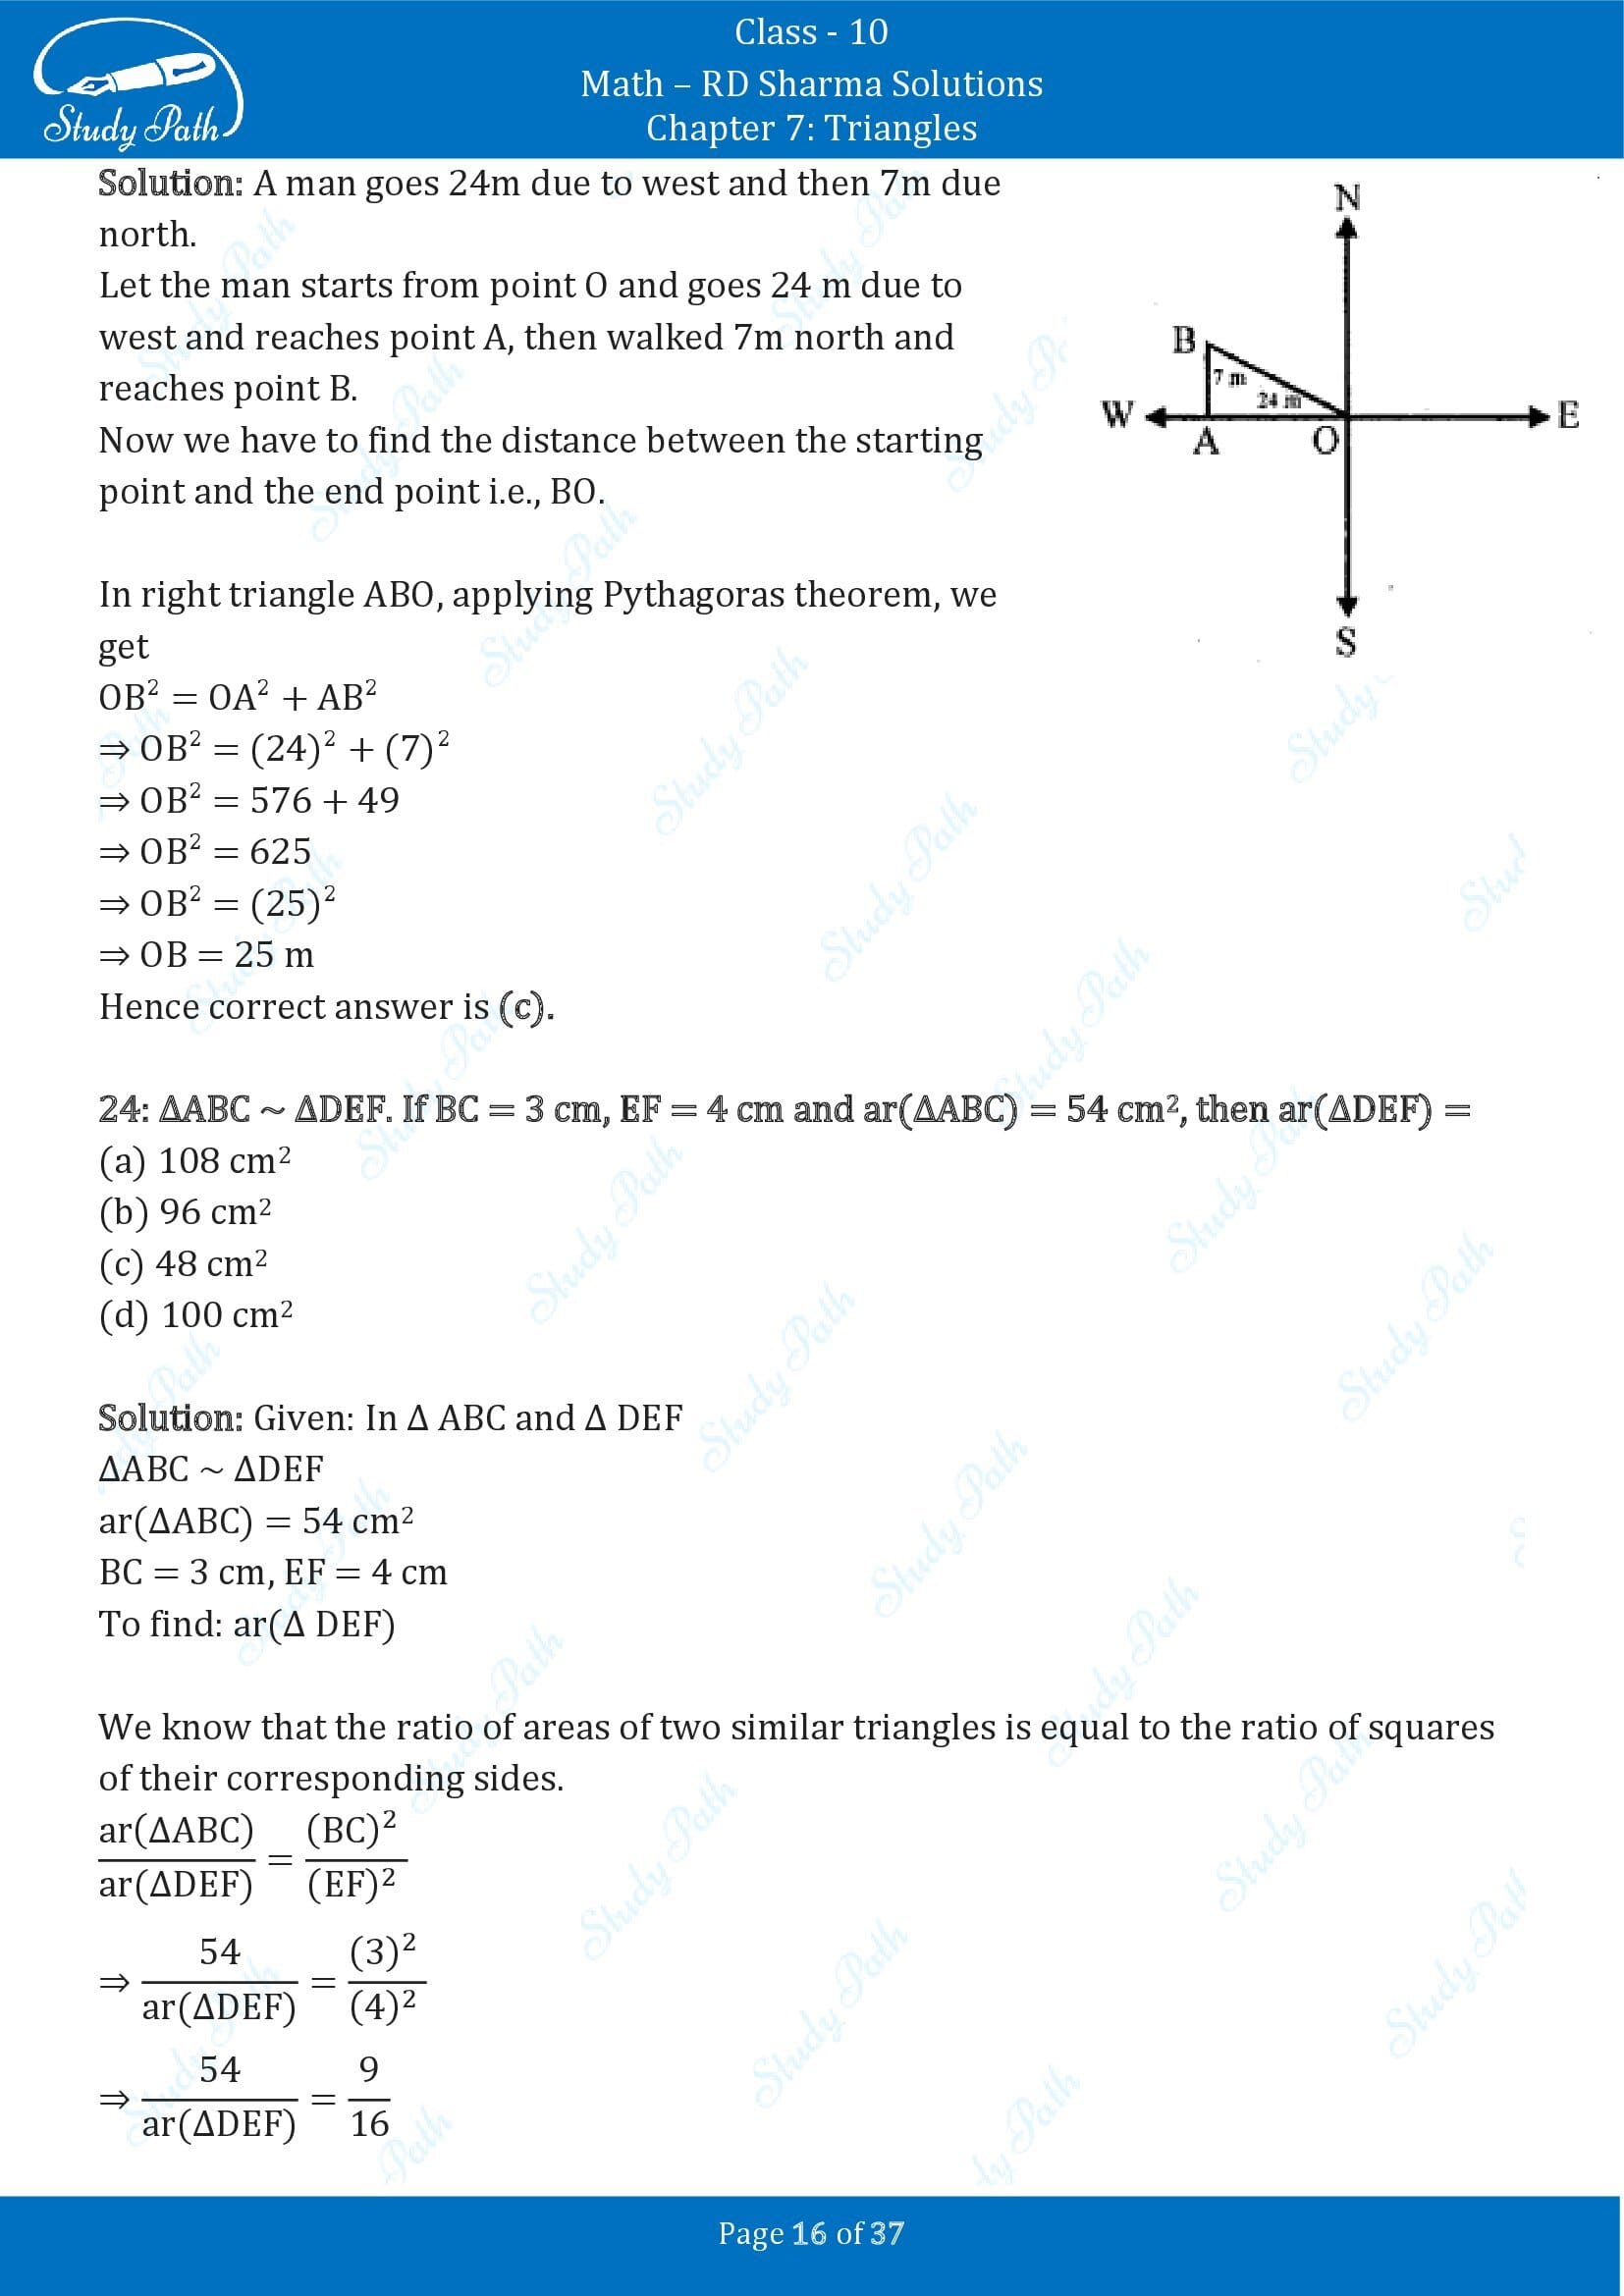 RD Sharma Solutions Class 10 Chapter 7 Triangles Multiple Choice Question MCQs 00016